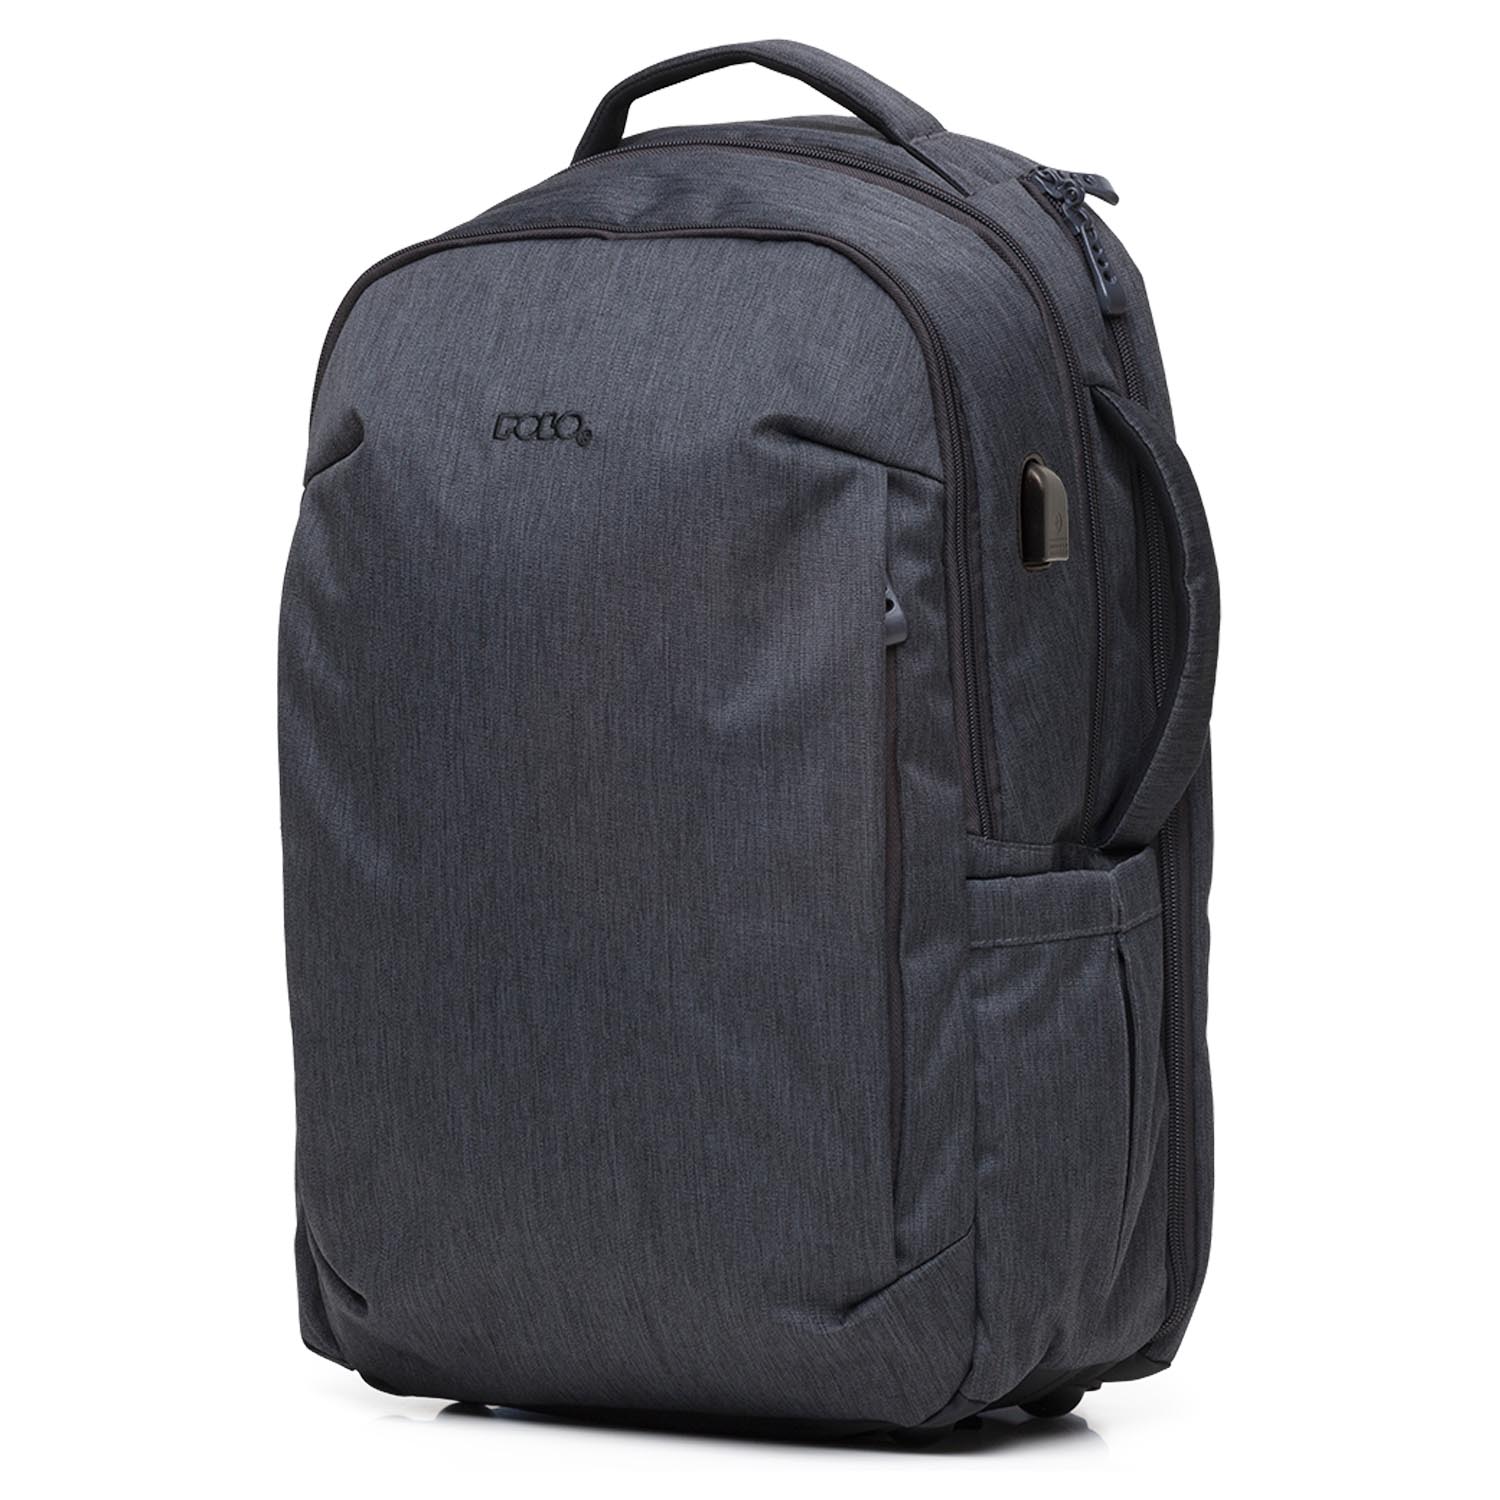 polo stric backpack grey 902021 2200 03